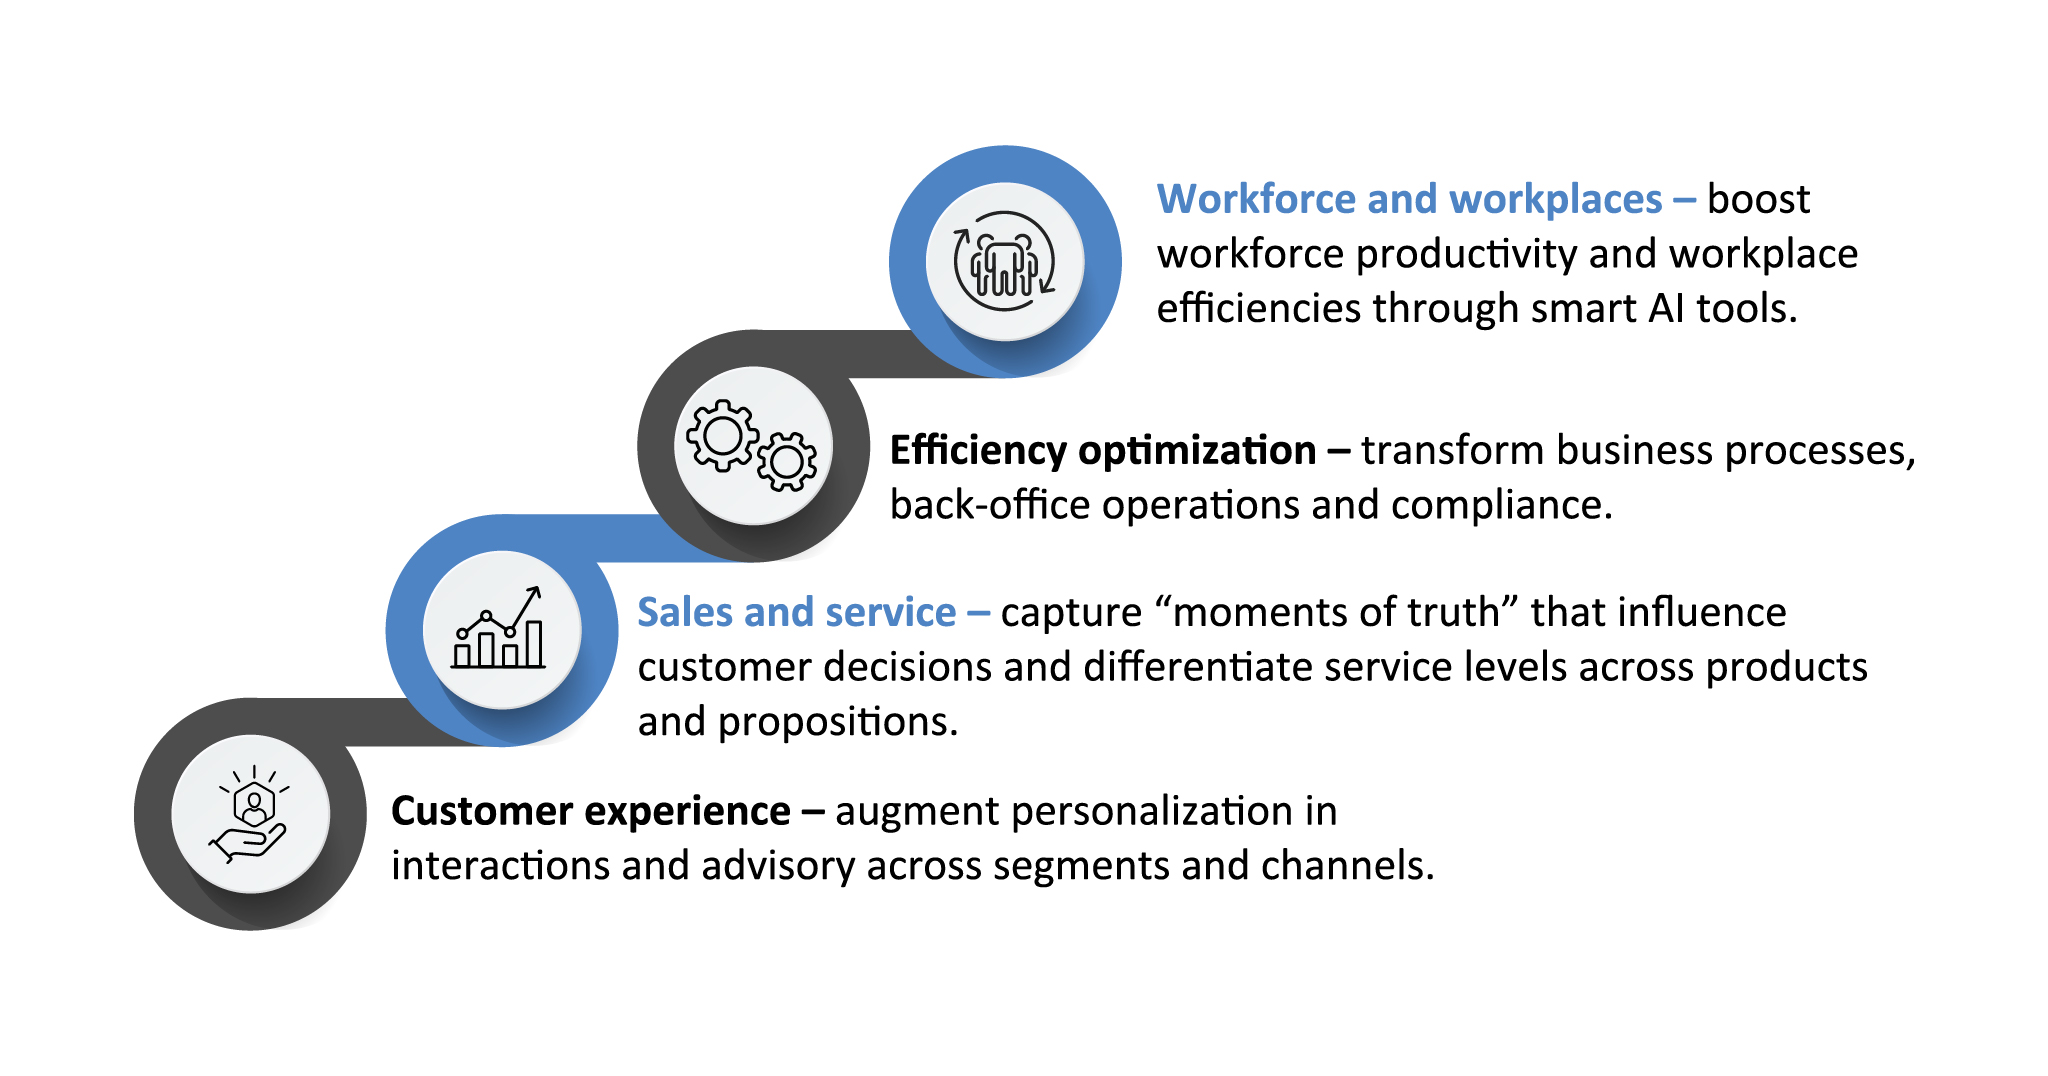 An infographic on how GenAI can benefit the BFSI value chain – across workplaces, efficiency optimization, sales, and CX.